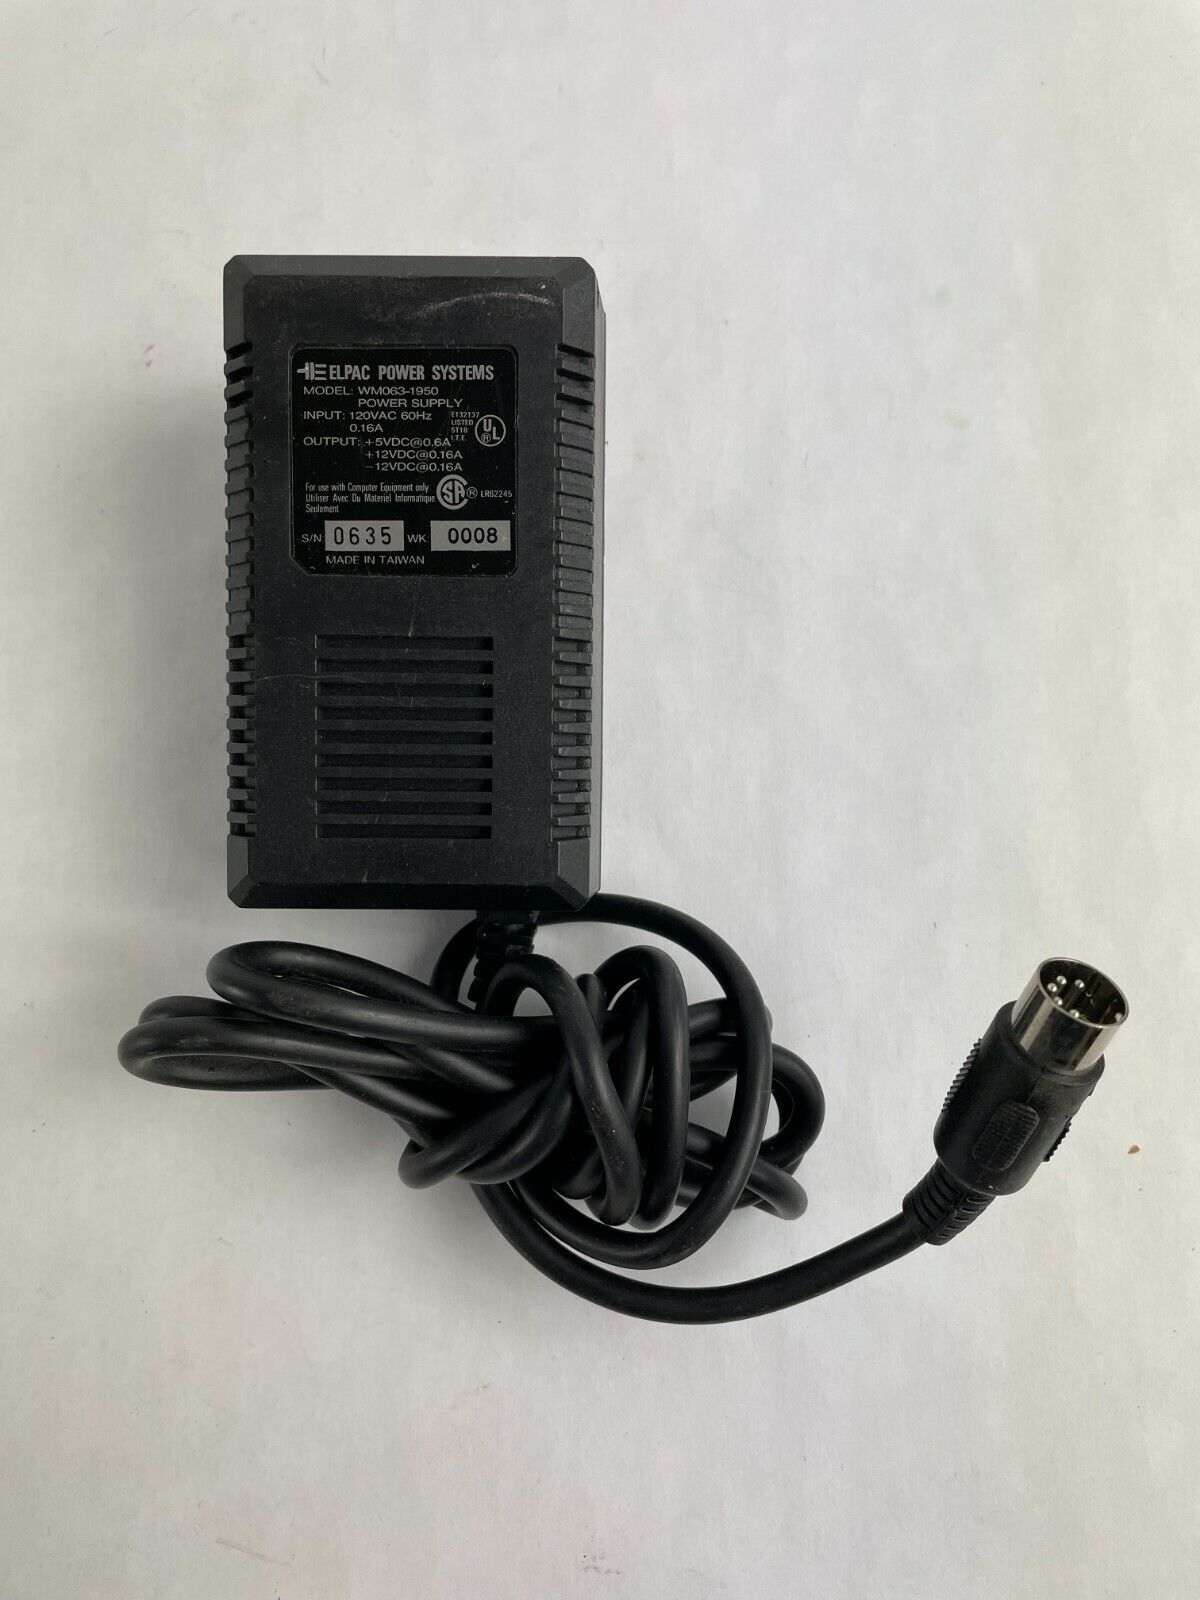 Genuine Elpac WM063-1950 Ac Adapter Output 5 V 0.6 A Power Supply Adapter A82 Compatible Brand: For Elpac Power System